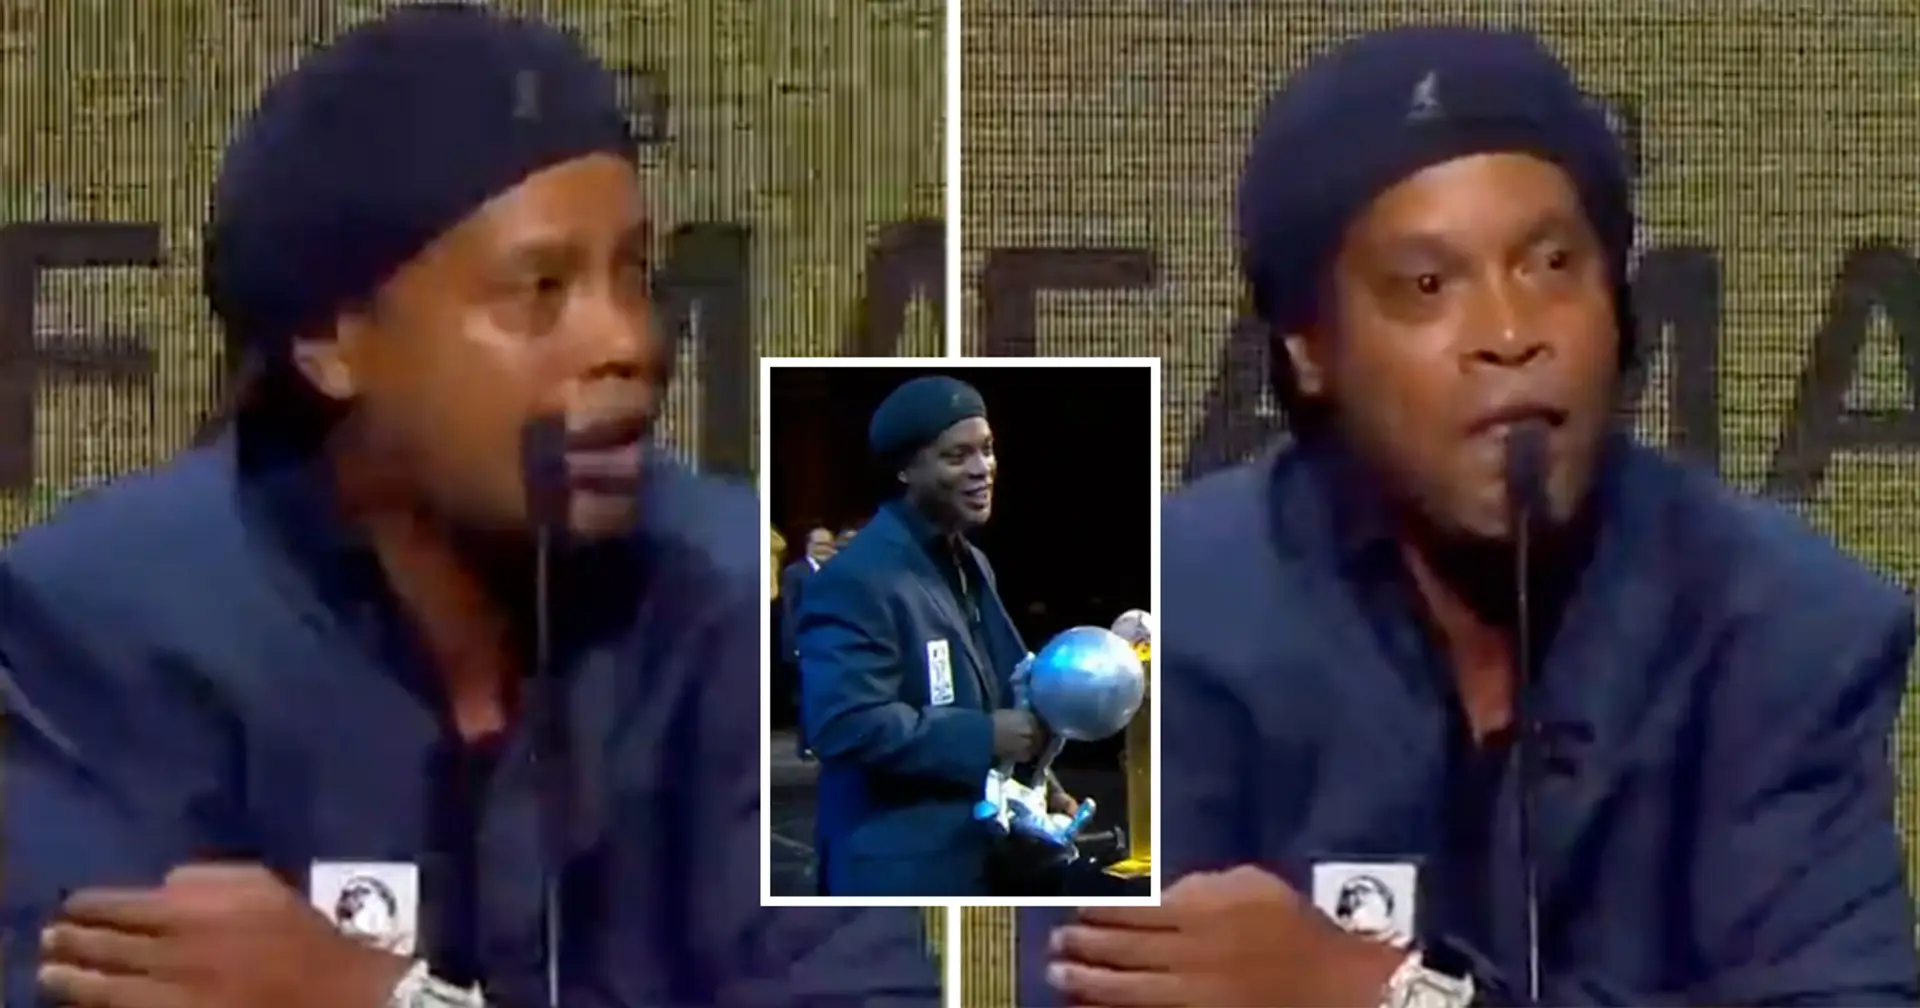 'I couldn't imagine it in my wildest dreams': Ronaldinho in tears while inducted into World Soccer Hall of Fame